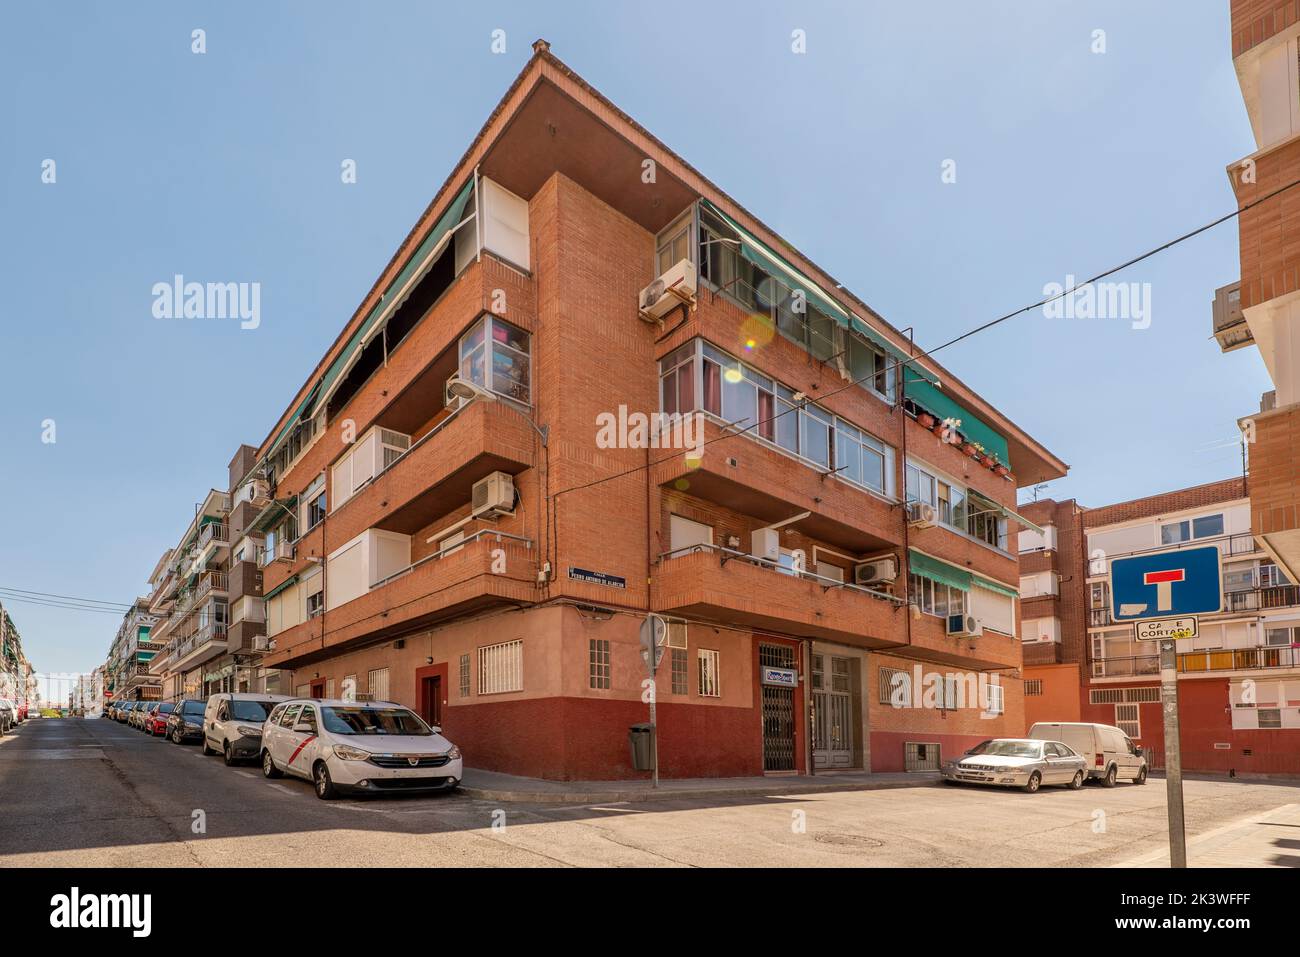 Facades of urban houses in the middle of the street with clear skies Stock Photo